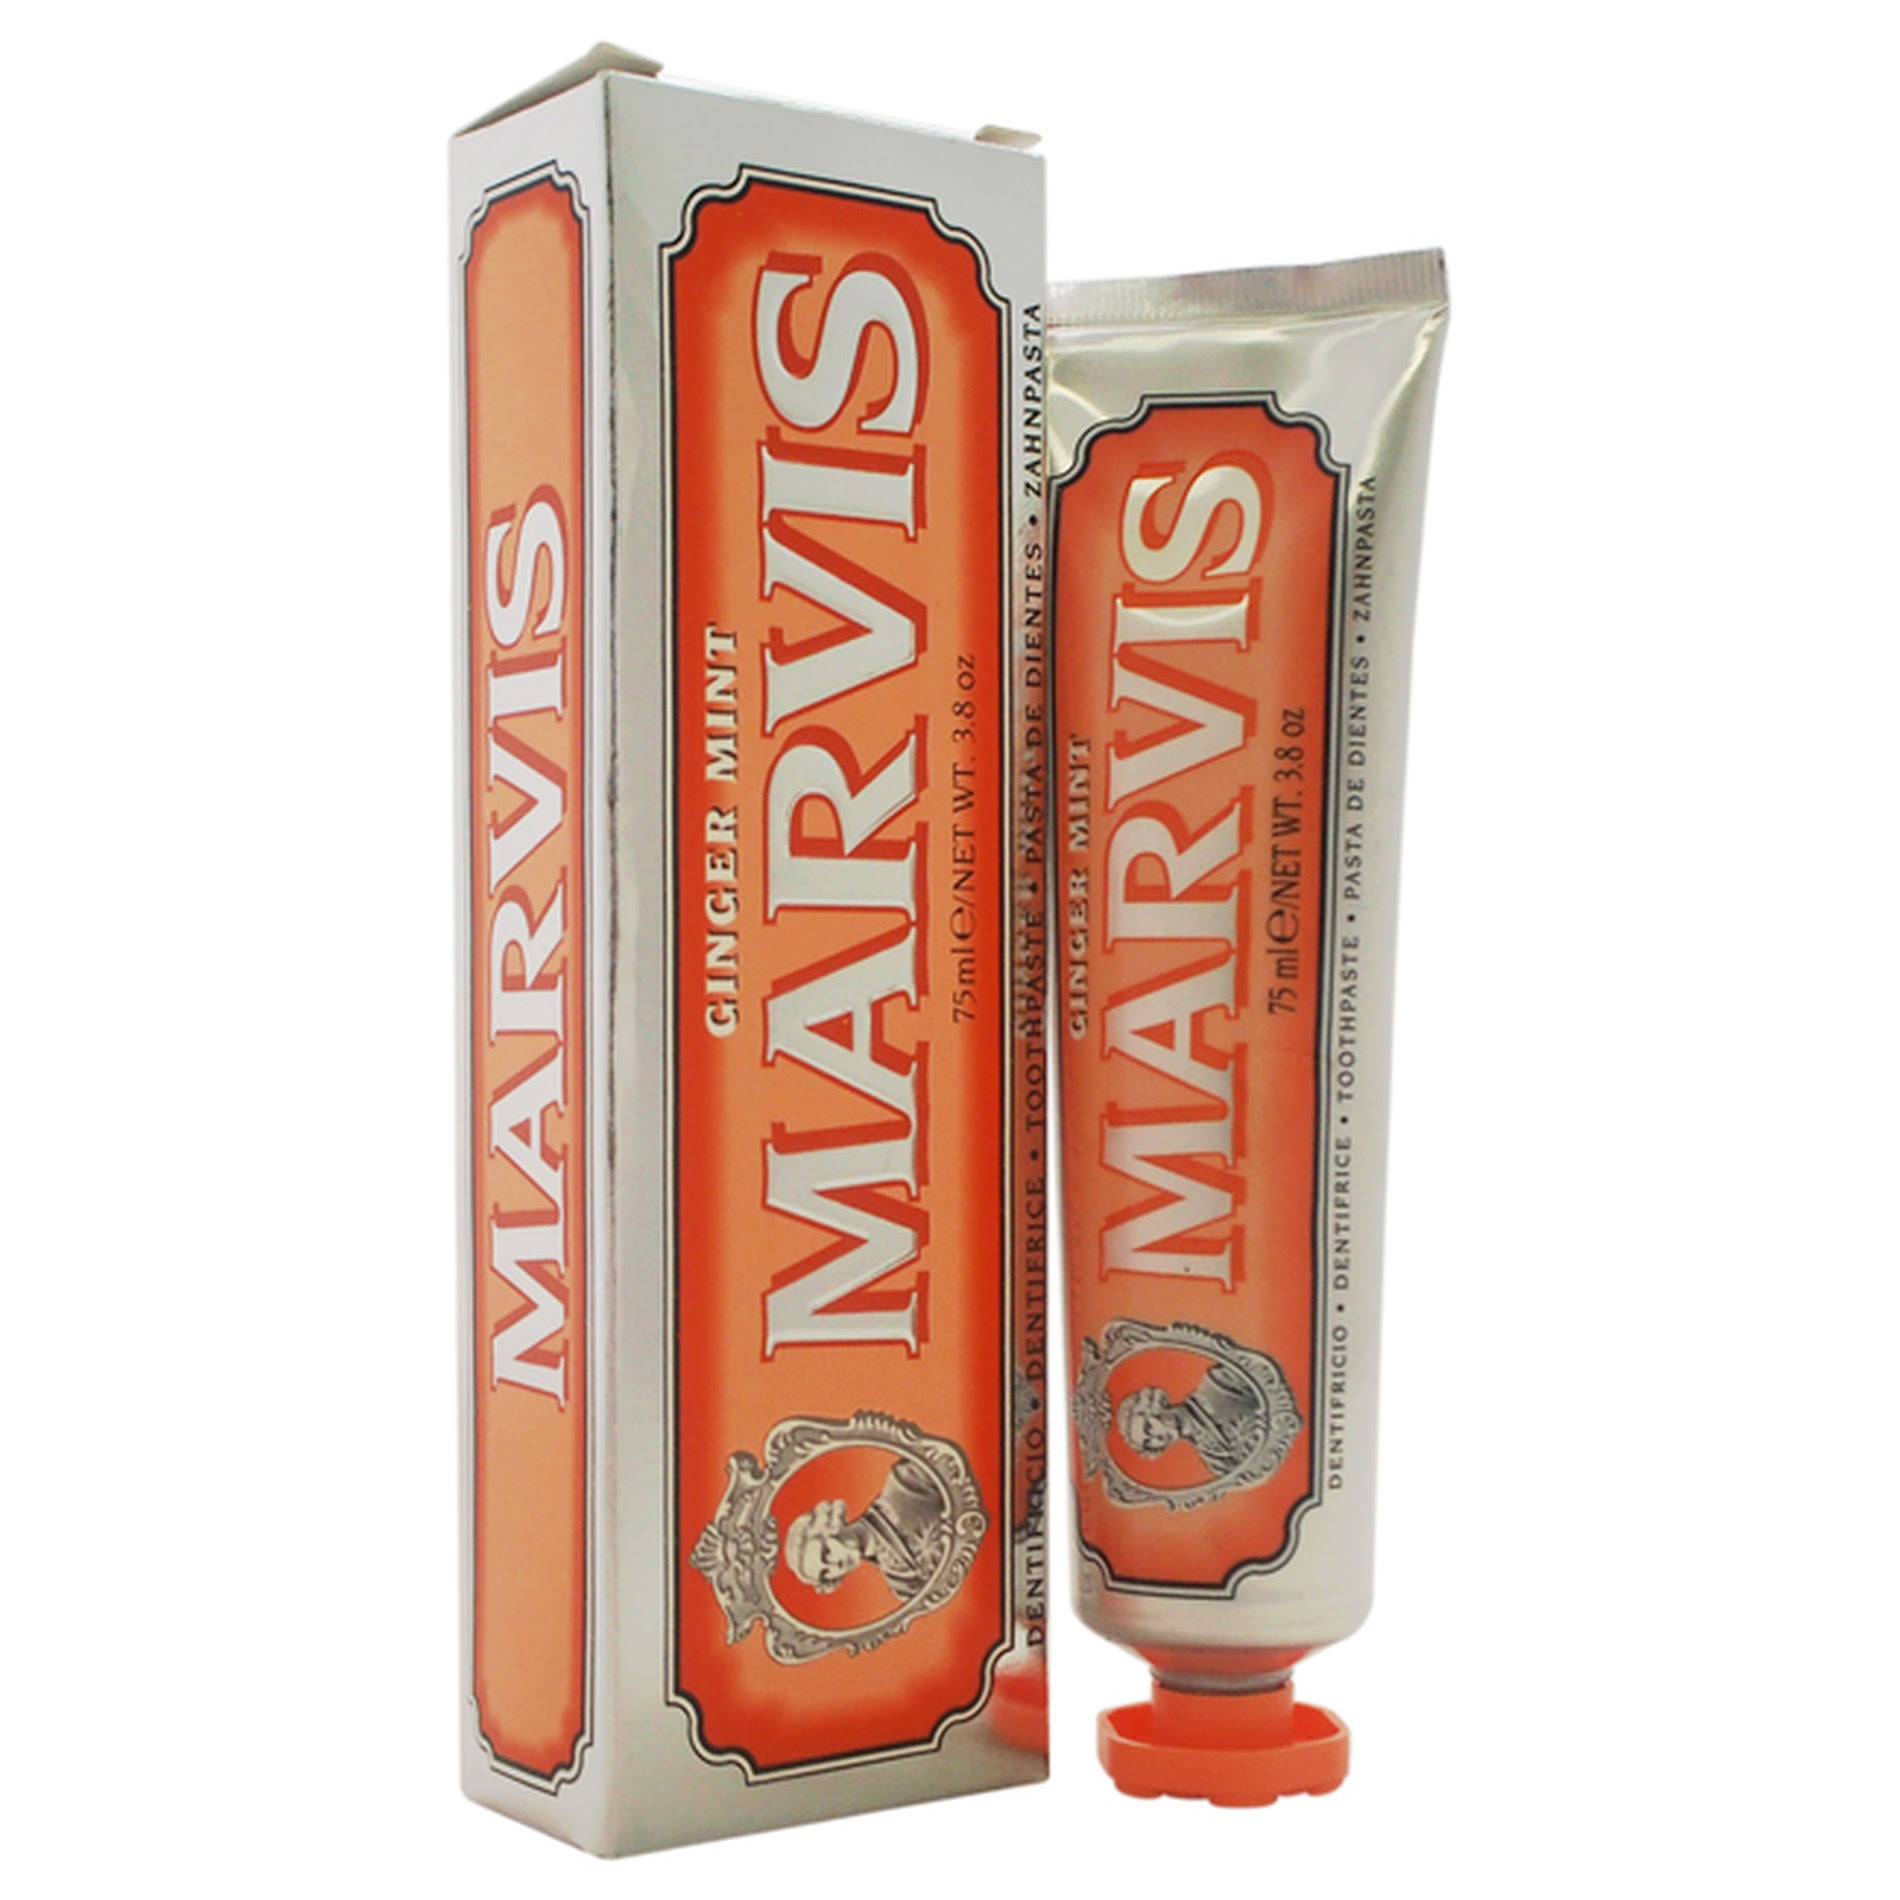 Marvis Ginger Mint Toothpaste - 75 ml